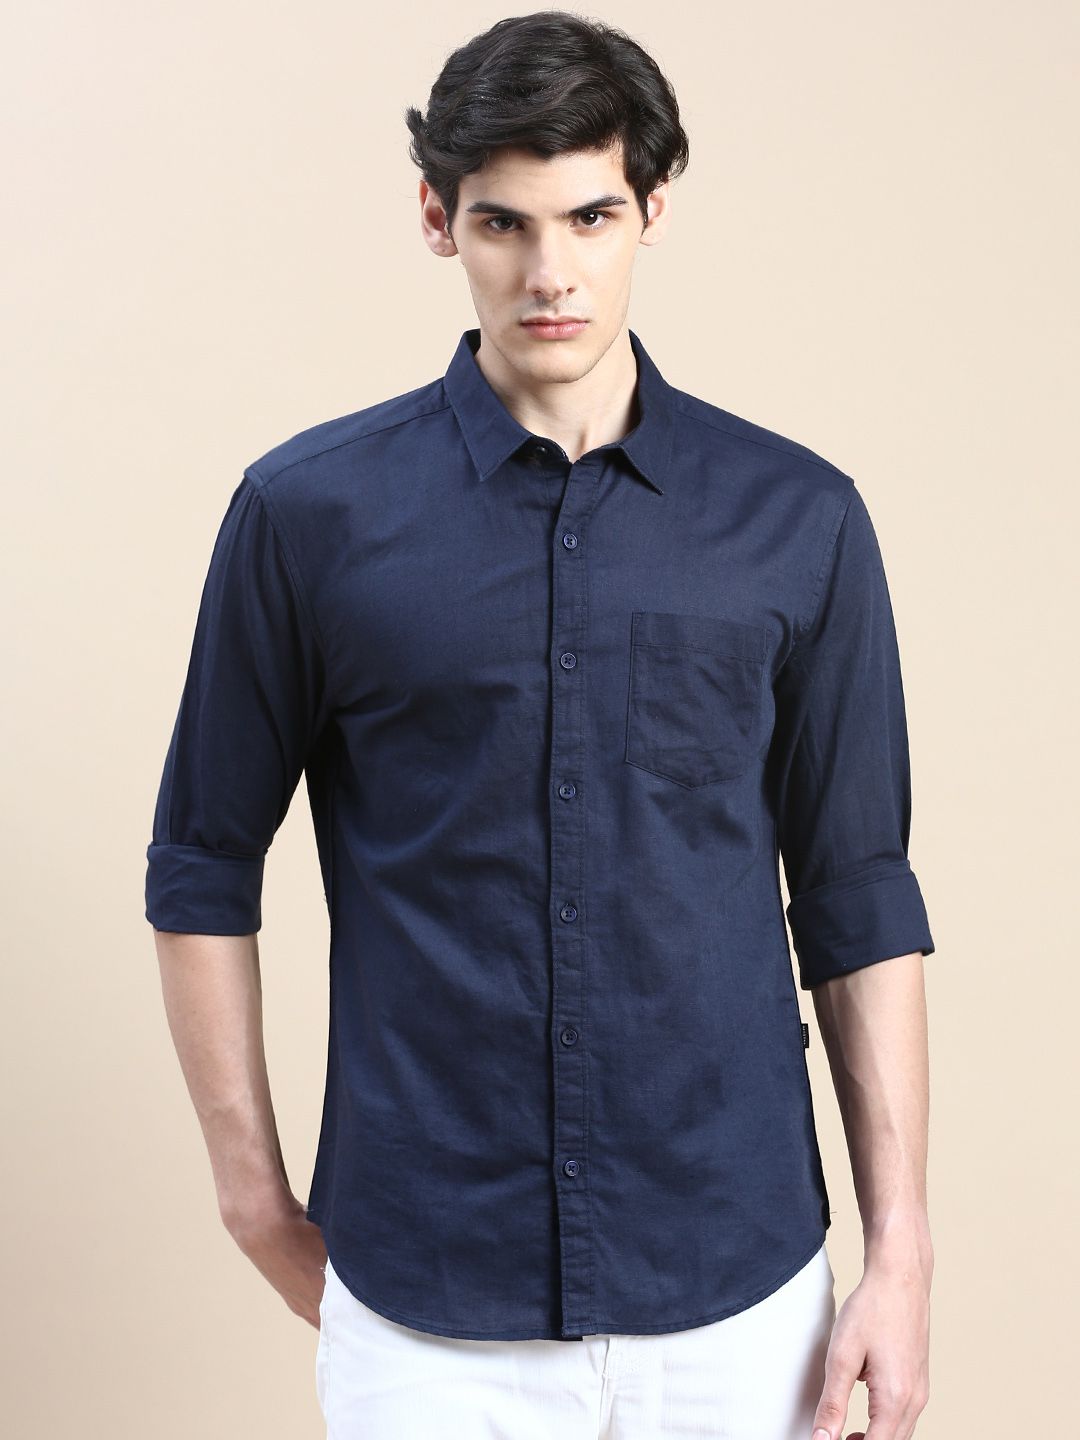     			Showoff Cotton Blend Regular Fit Solids Full Sleeves Men's Casual Shirt - Navy Blue ( Pack of 1 )